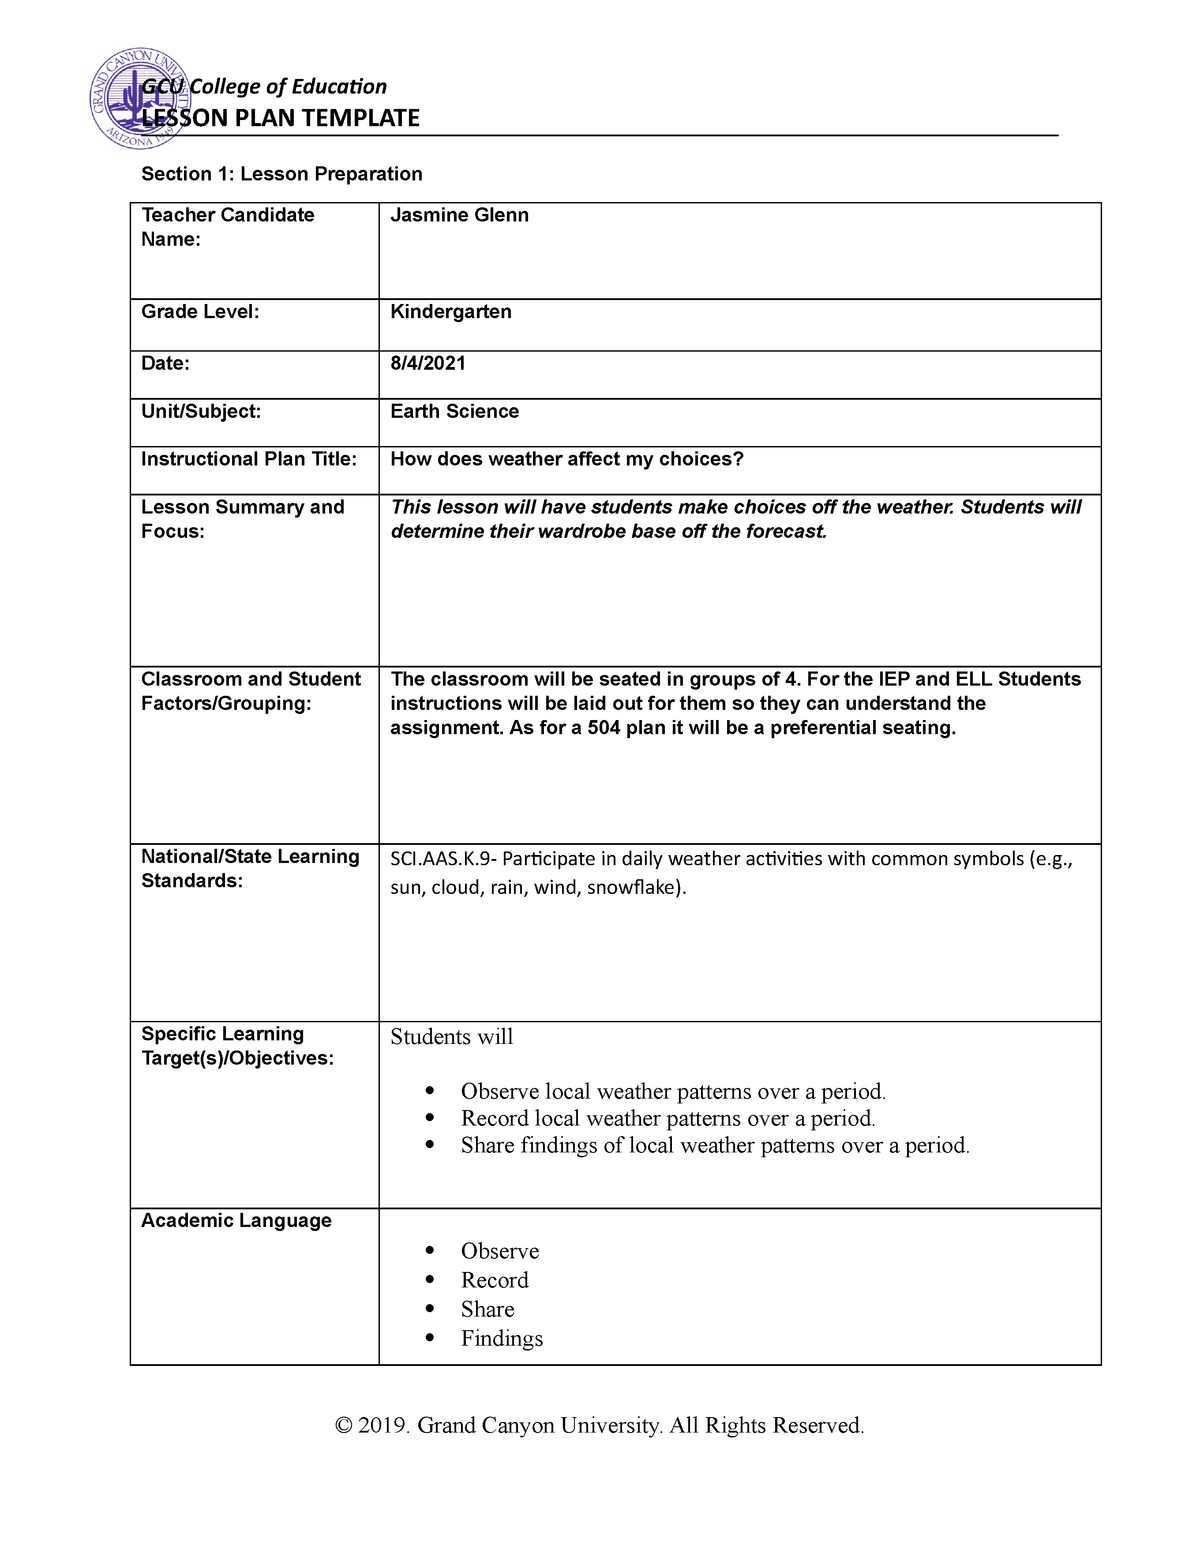 Coe lesson plan template 1 LESSON PLAN TEMPLATE Section 1 Lesson